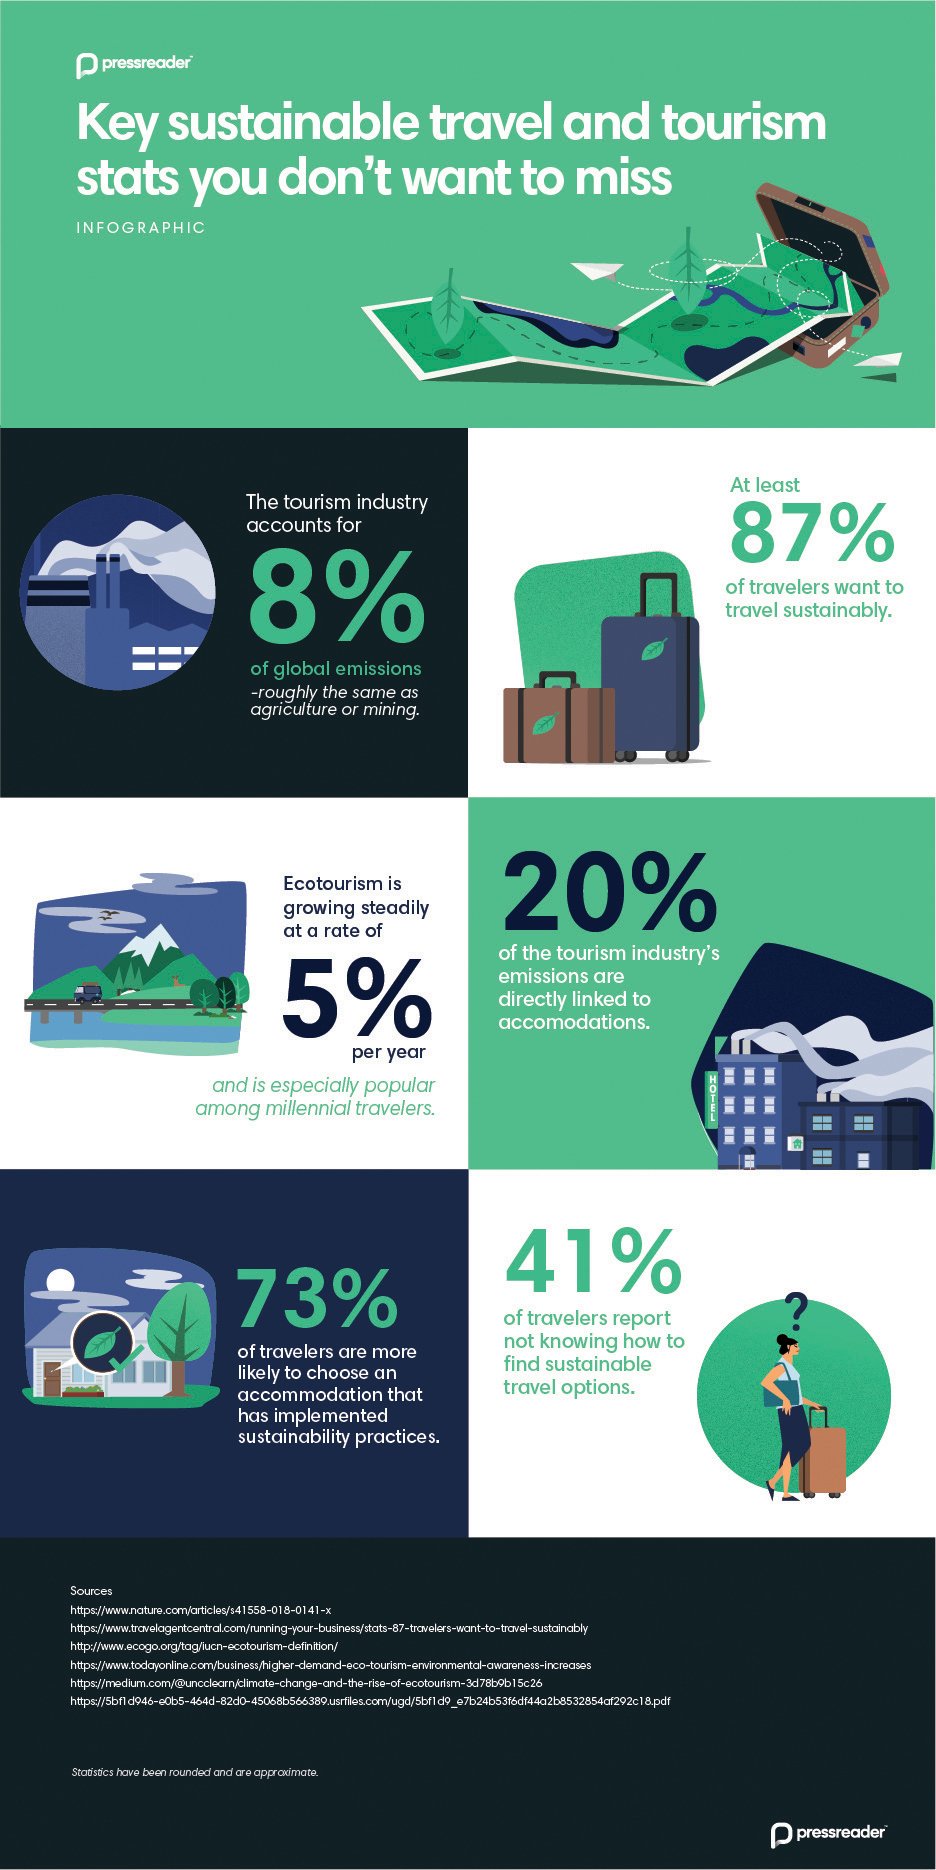 infographic-sustainable-travel-tourism-stats-pressreader